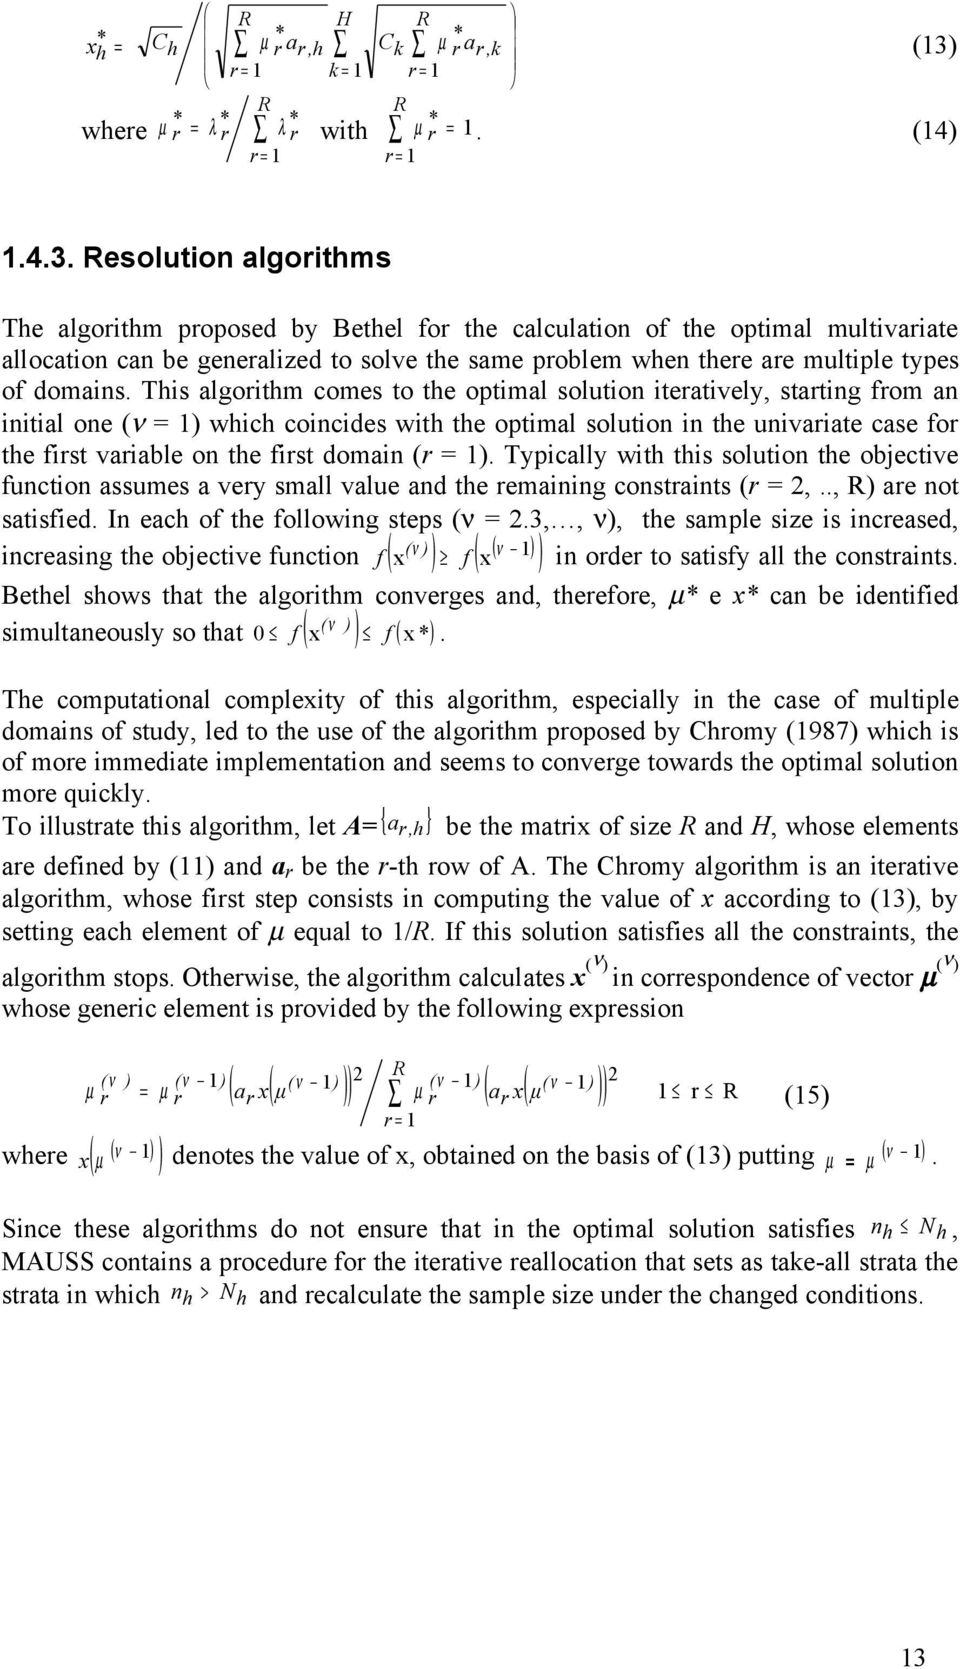 Resolution algorithms The algorithm proposed by Bethel for the calculation of the optimal multivariate allocation can be generalized to solve the same problem when there are multiple types of domains.